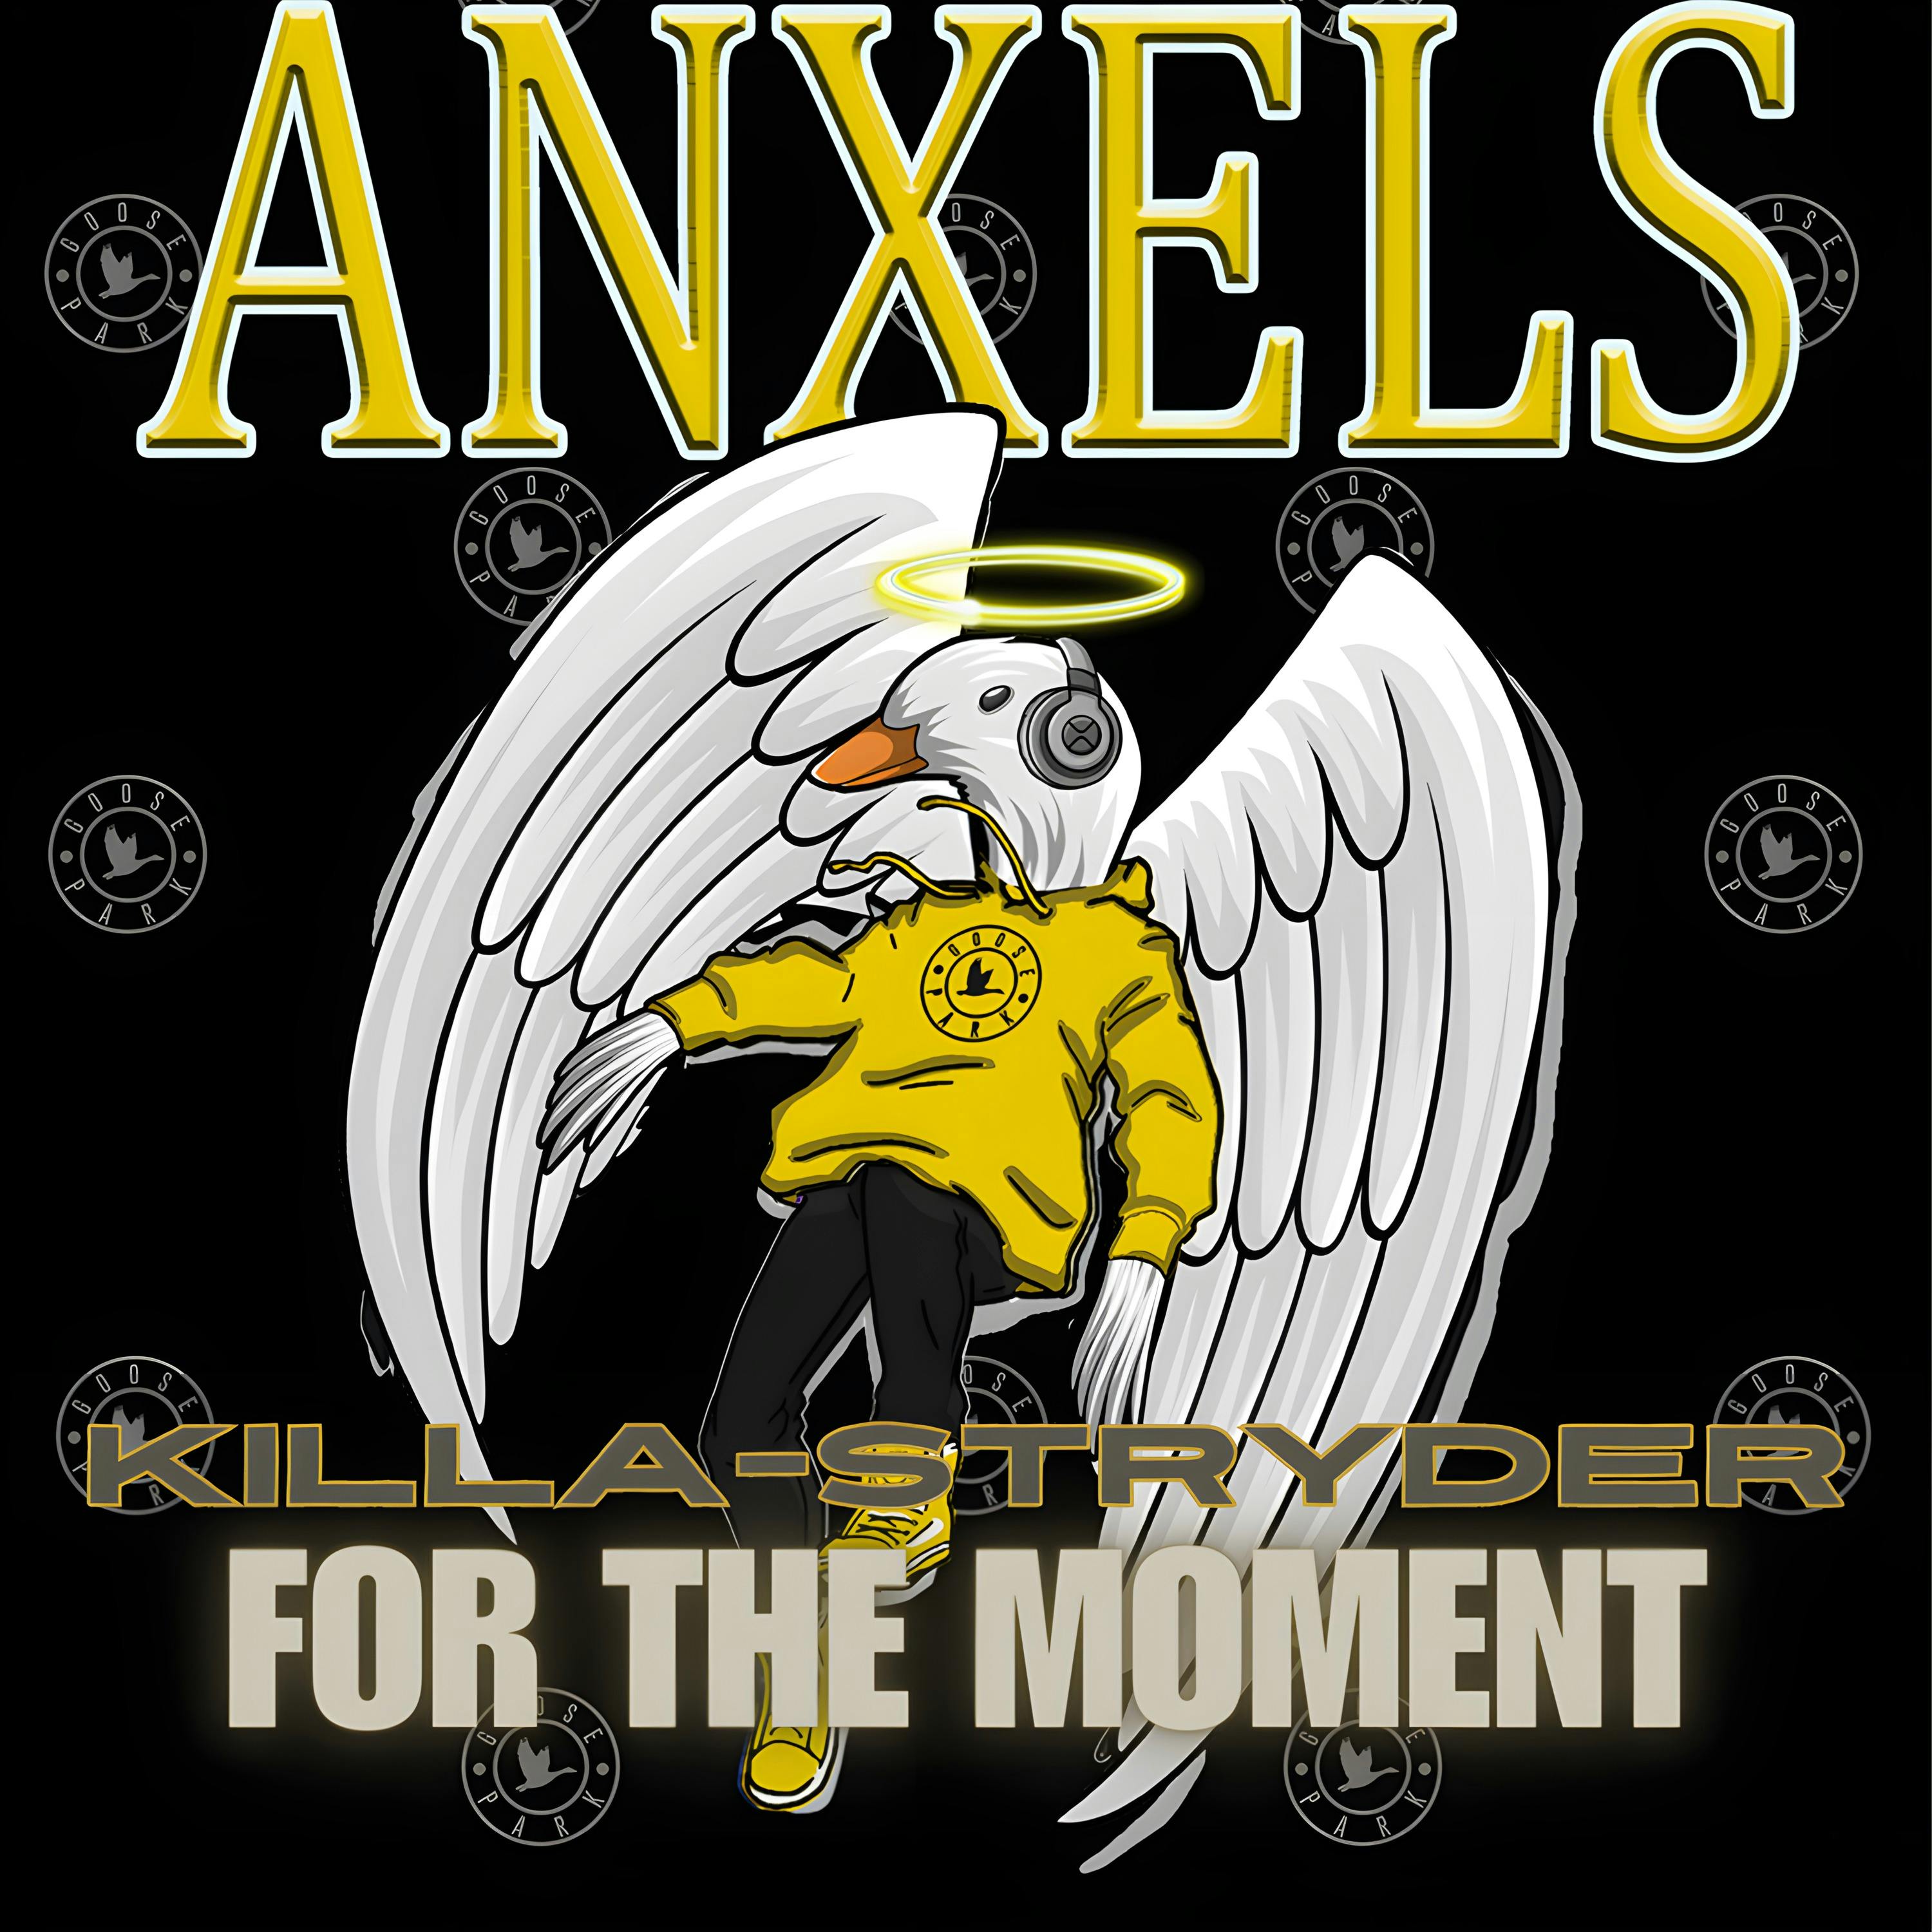 For the Moment (Earn $ANXLS)